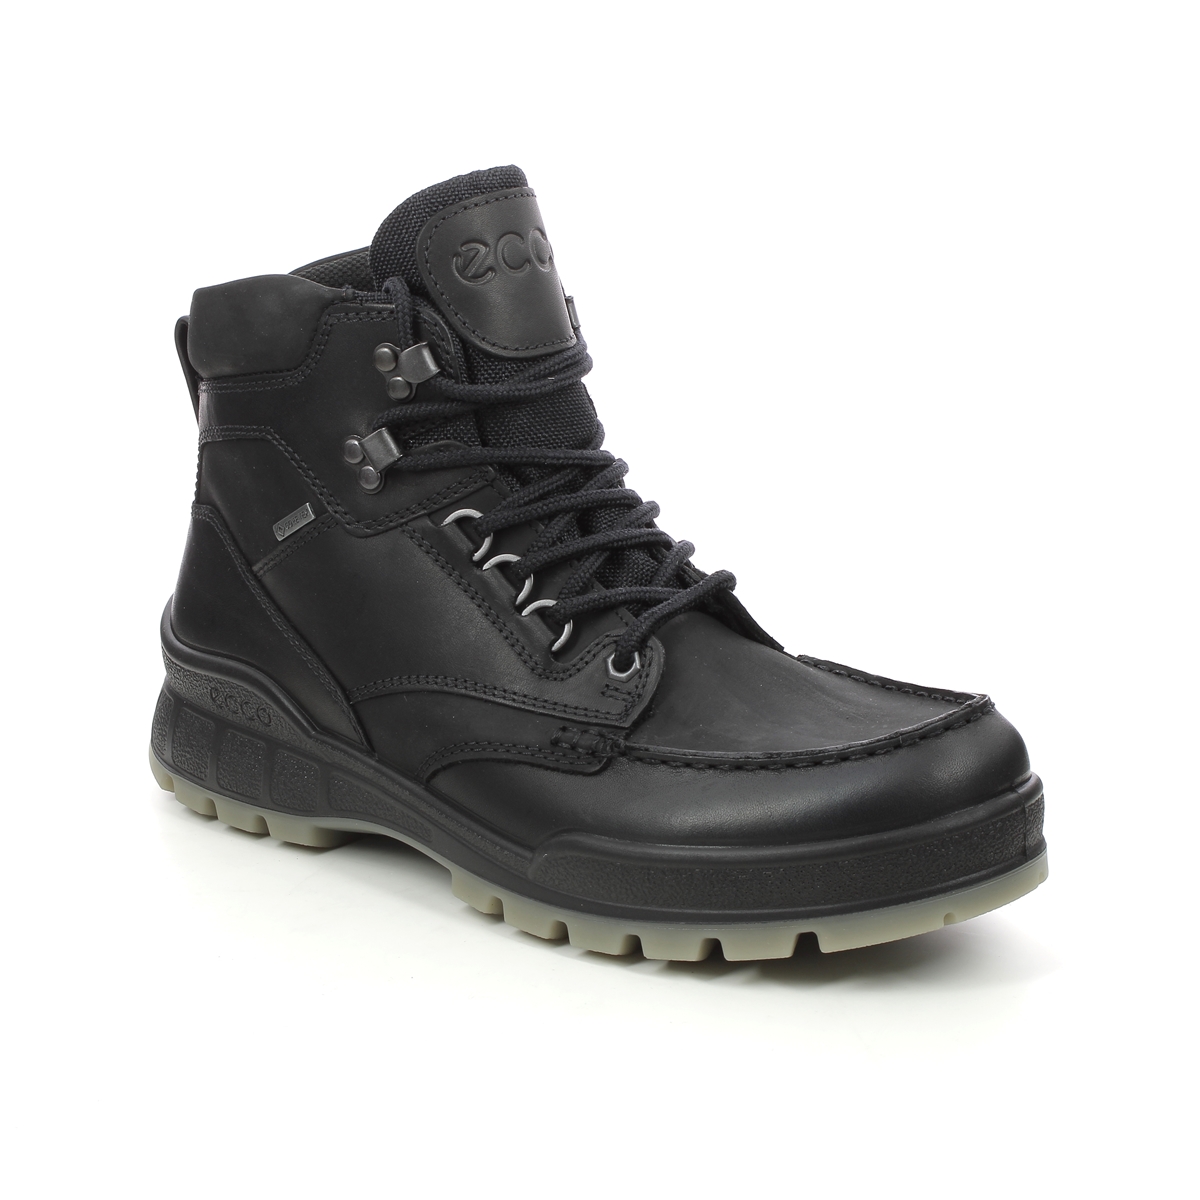 Ecco Track 25 Boot Gtx Black Leather Mens Outdoor Walking Boots 831704-51052 In Size 43 In Plain Black Leather